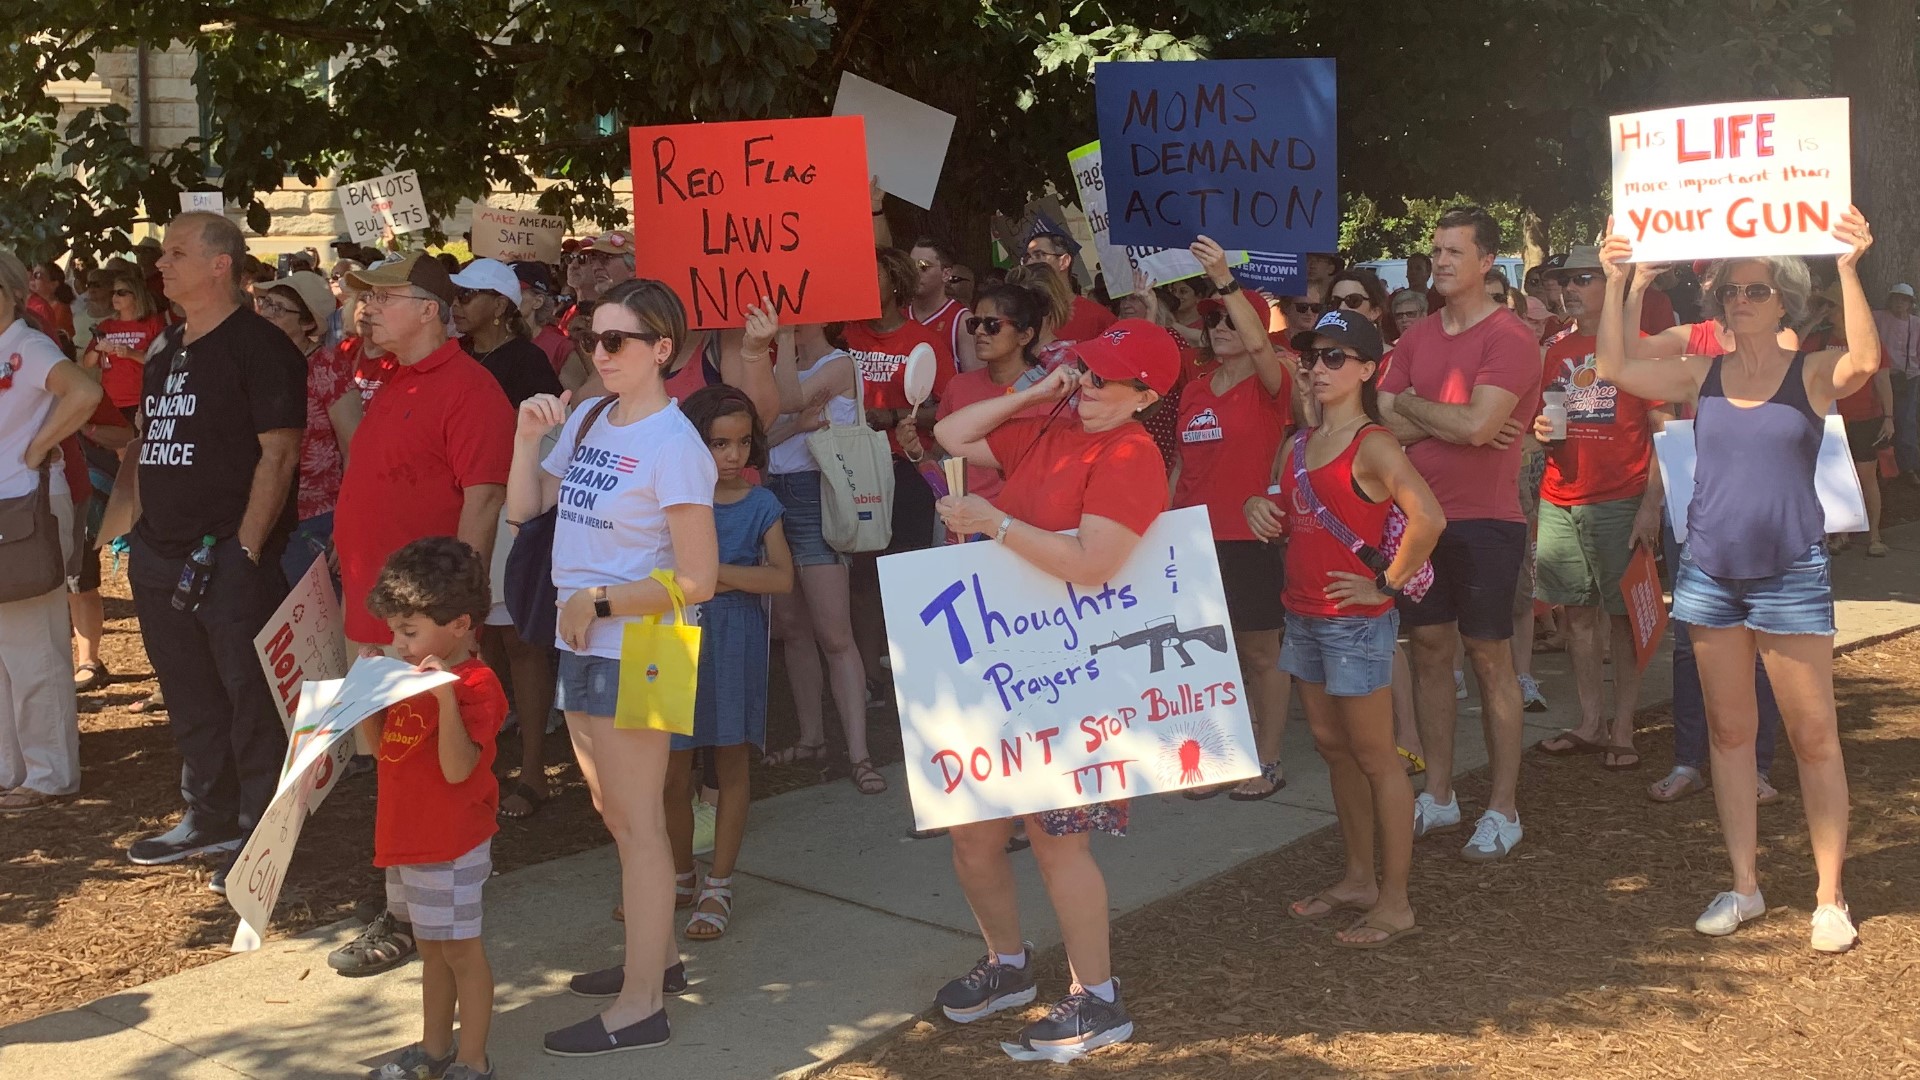 Moms Demand Action organized the event in Decatur -- which was held in conjunction with rallies across the country to end gun violence.